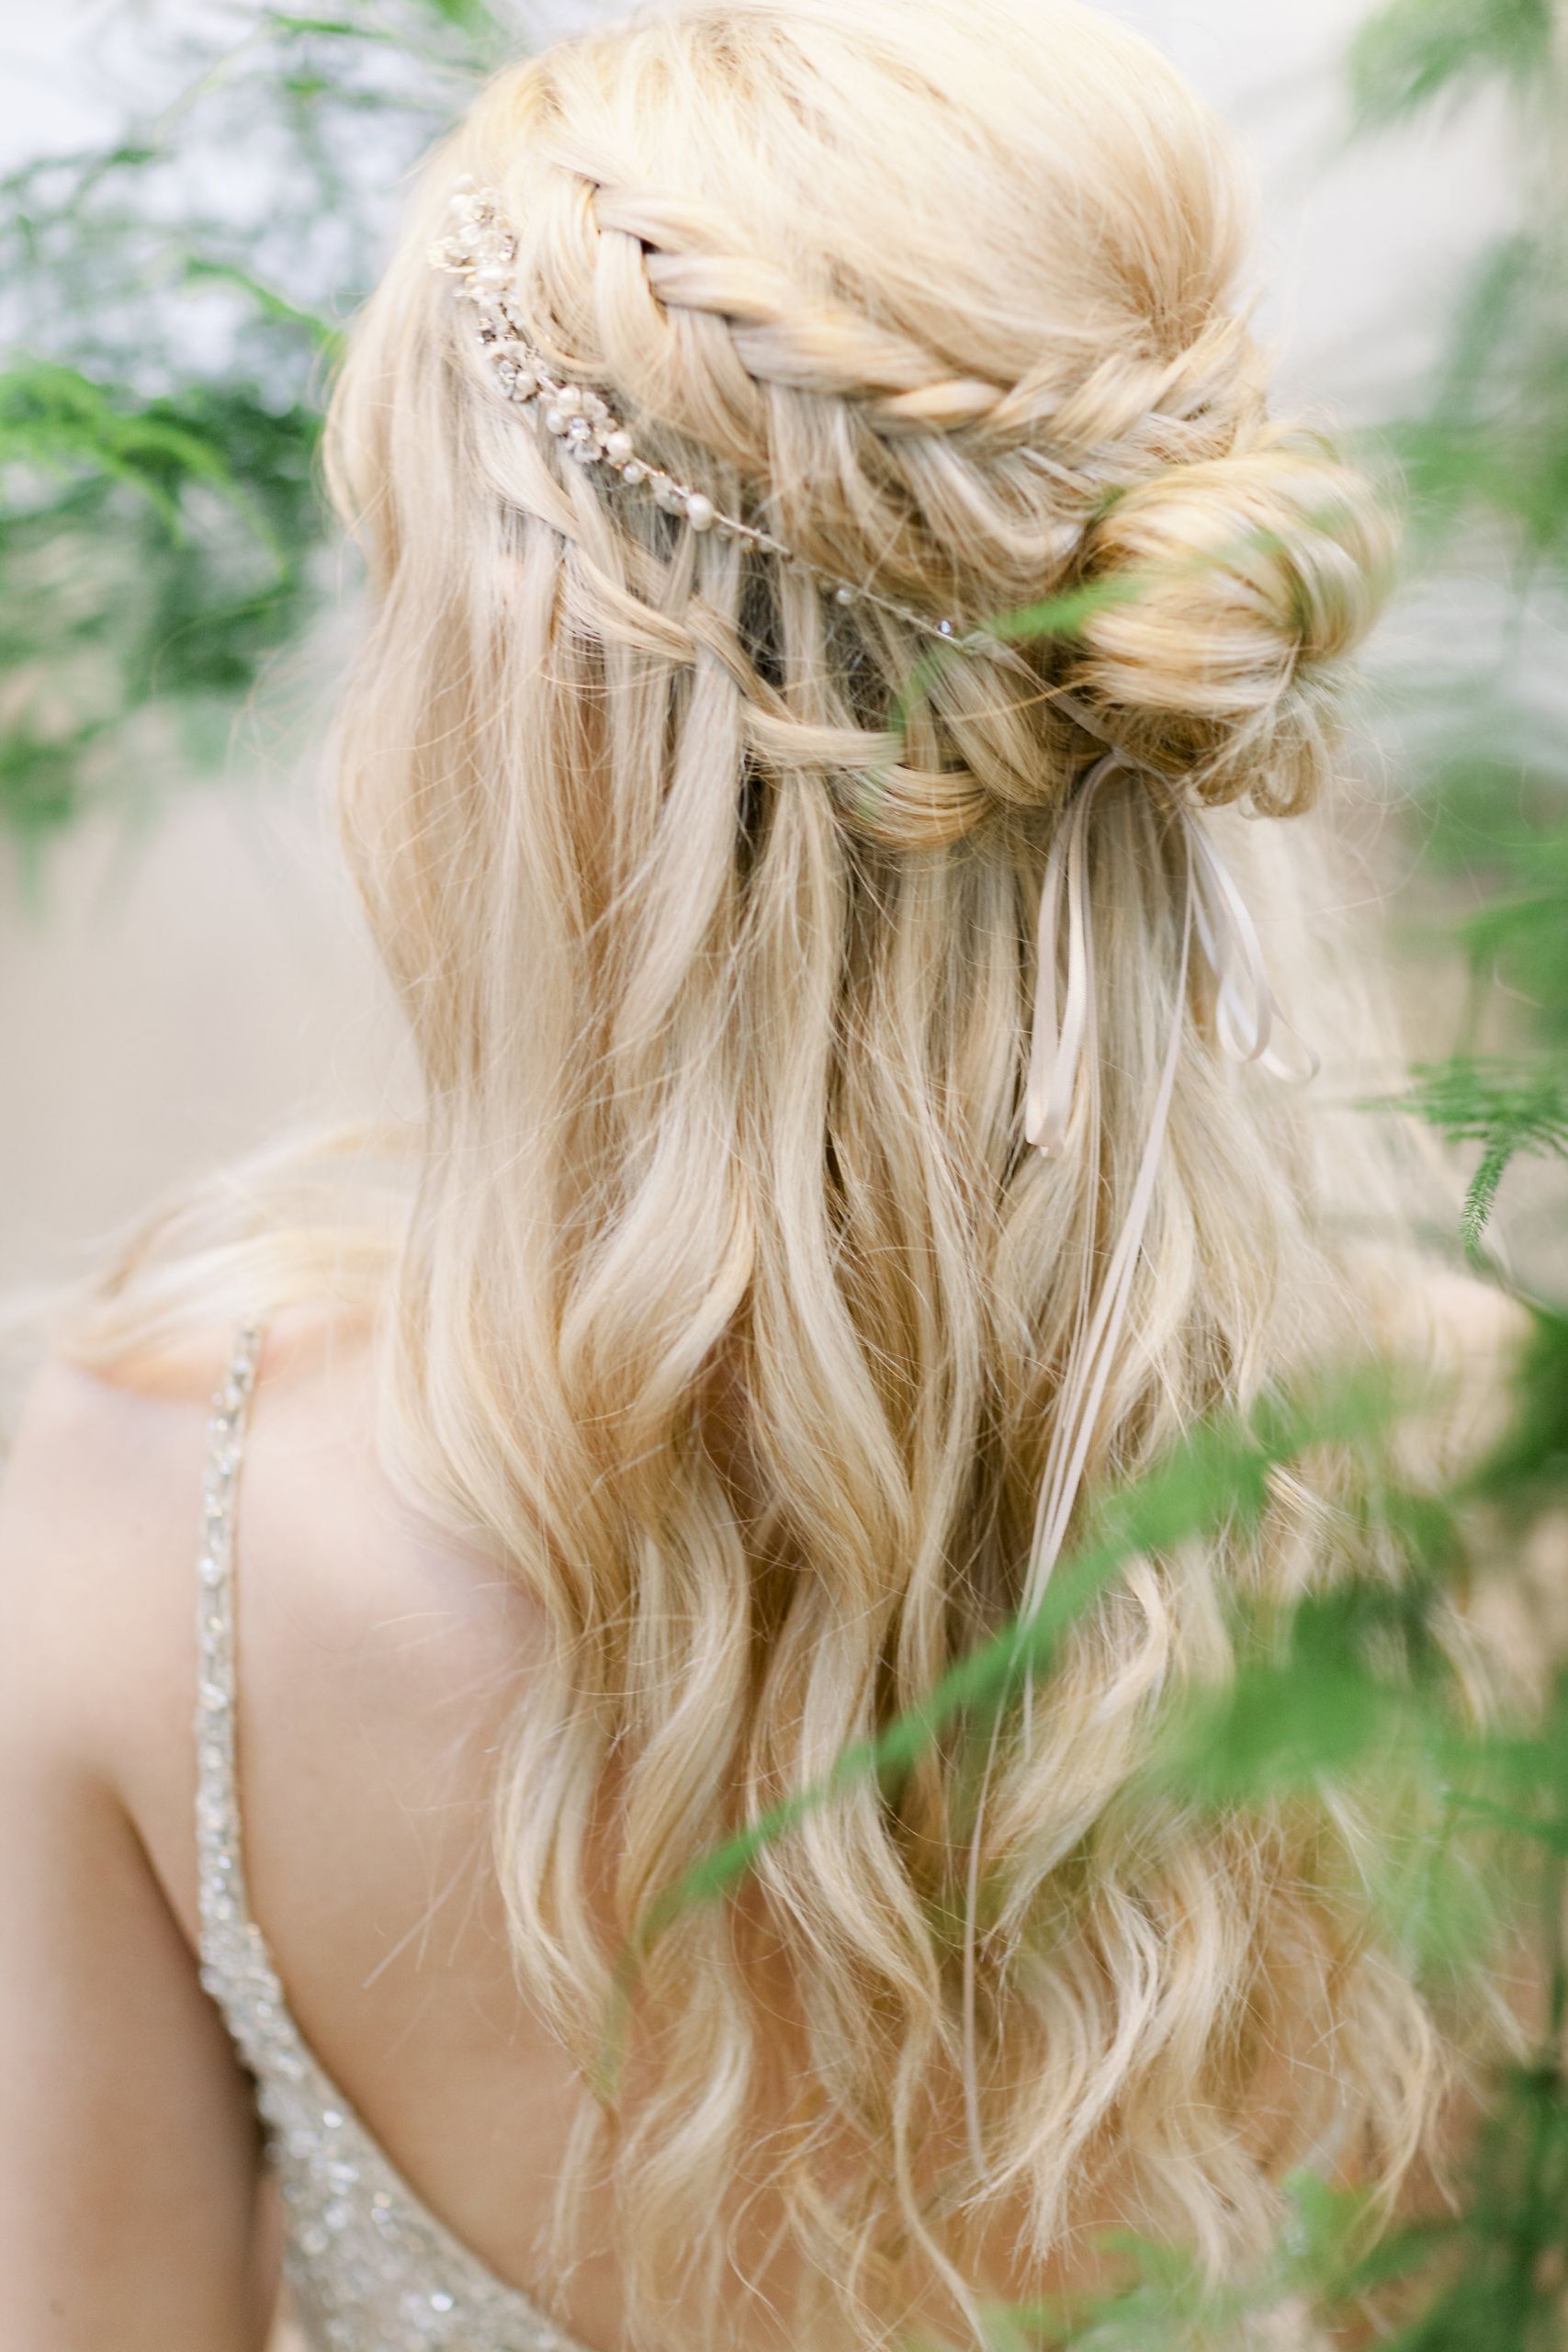 Half Up Half Down Wedding Hairstyles With Braids
 Beautiful Bridal Half Up Half Down Wedding Hair Inspiration